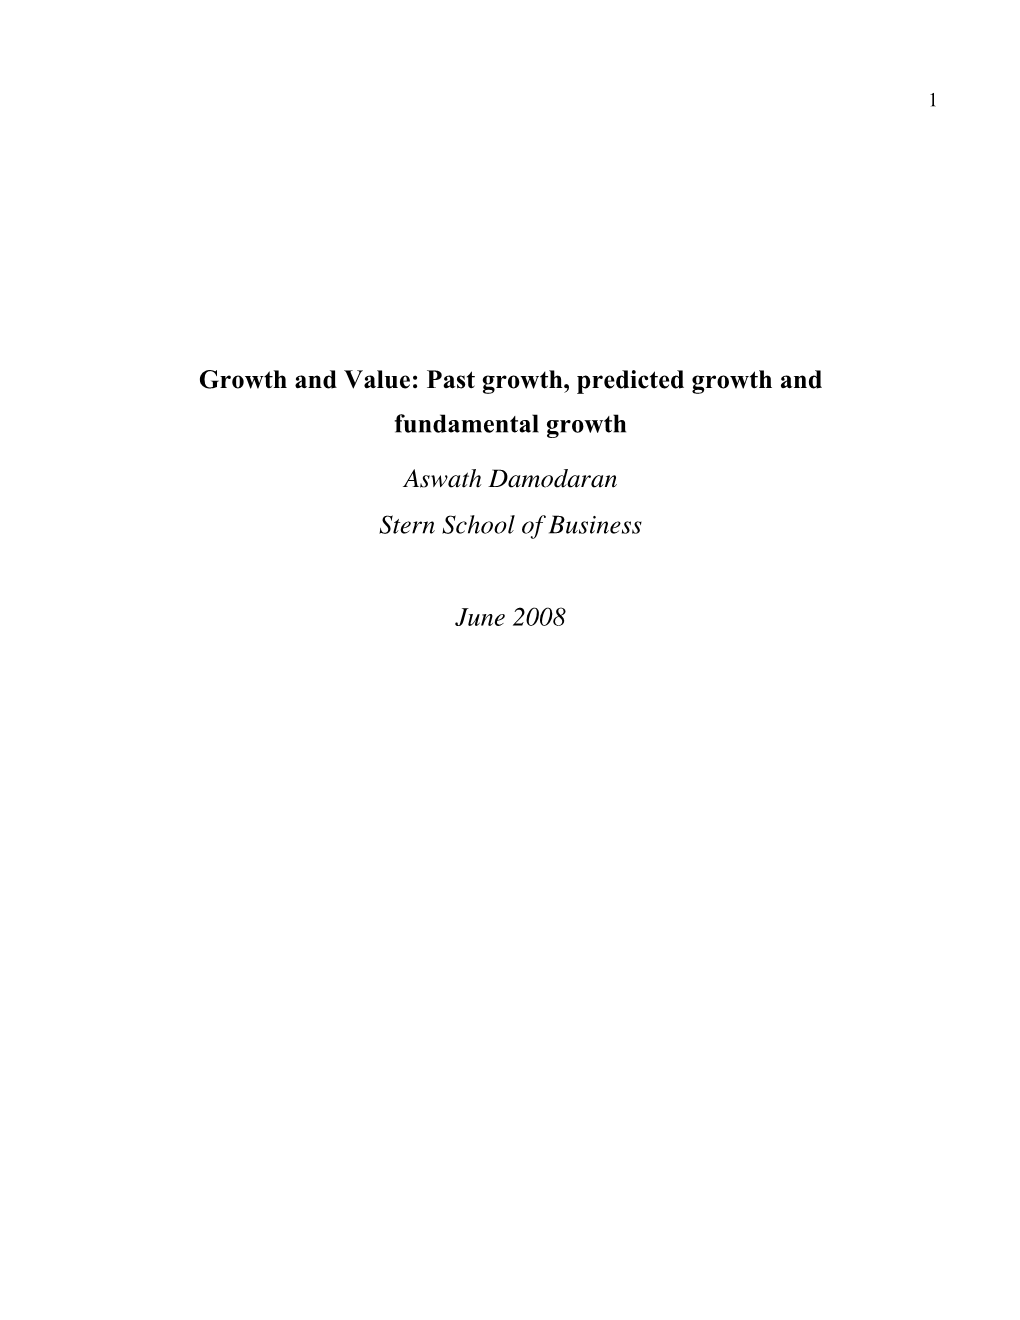 Growth and Value: Past Growth, Predicted Growth and Fundamental Growth